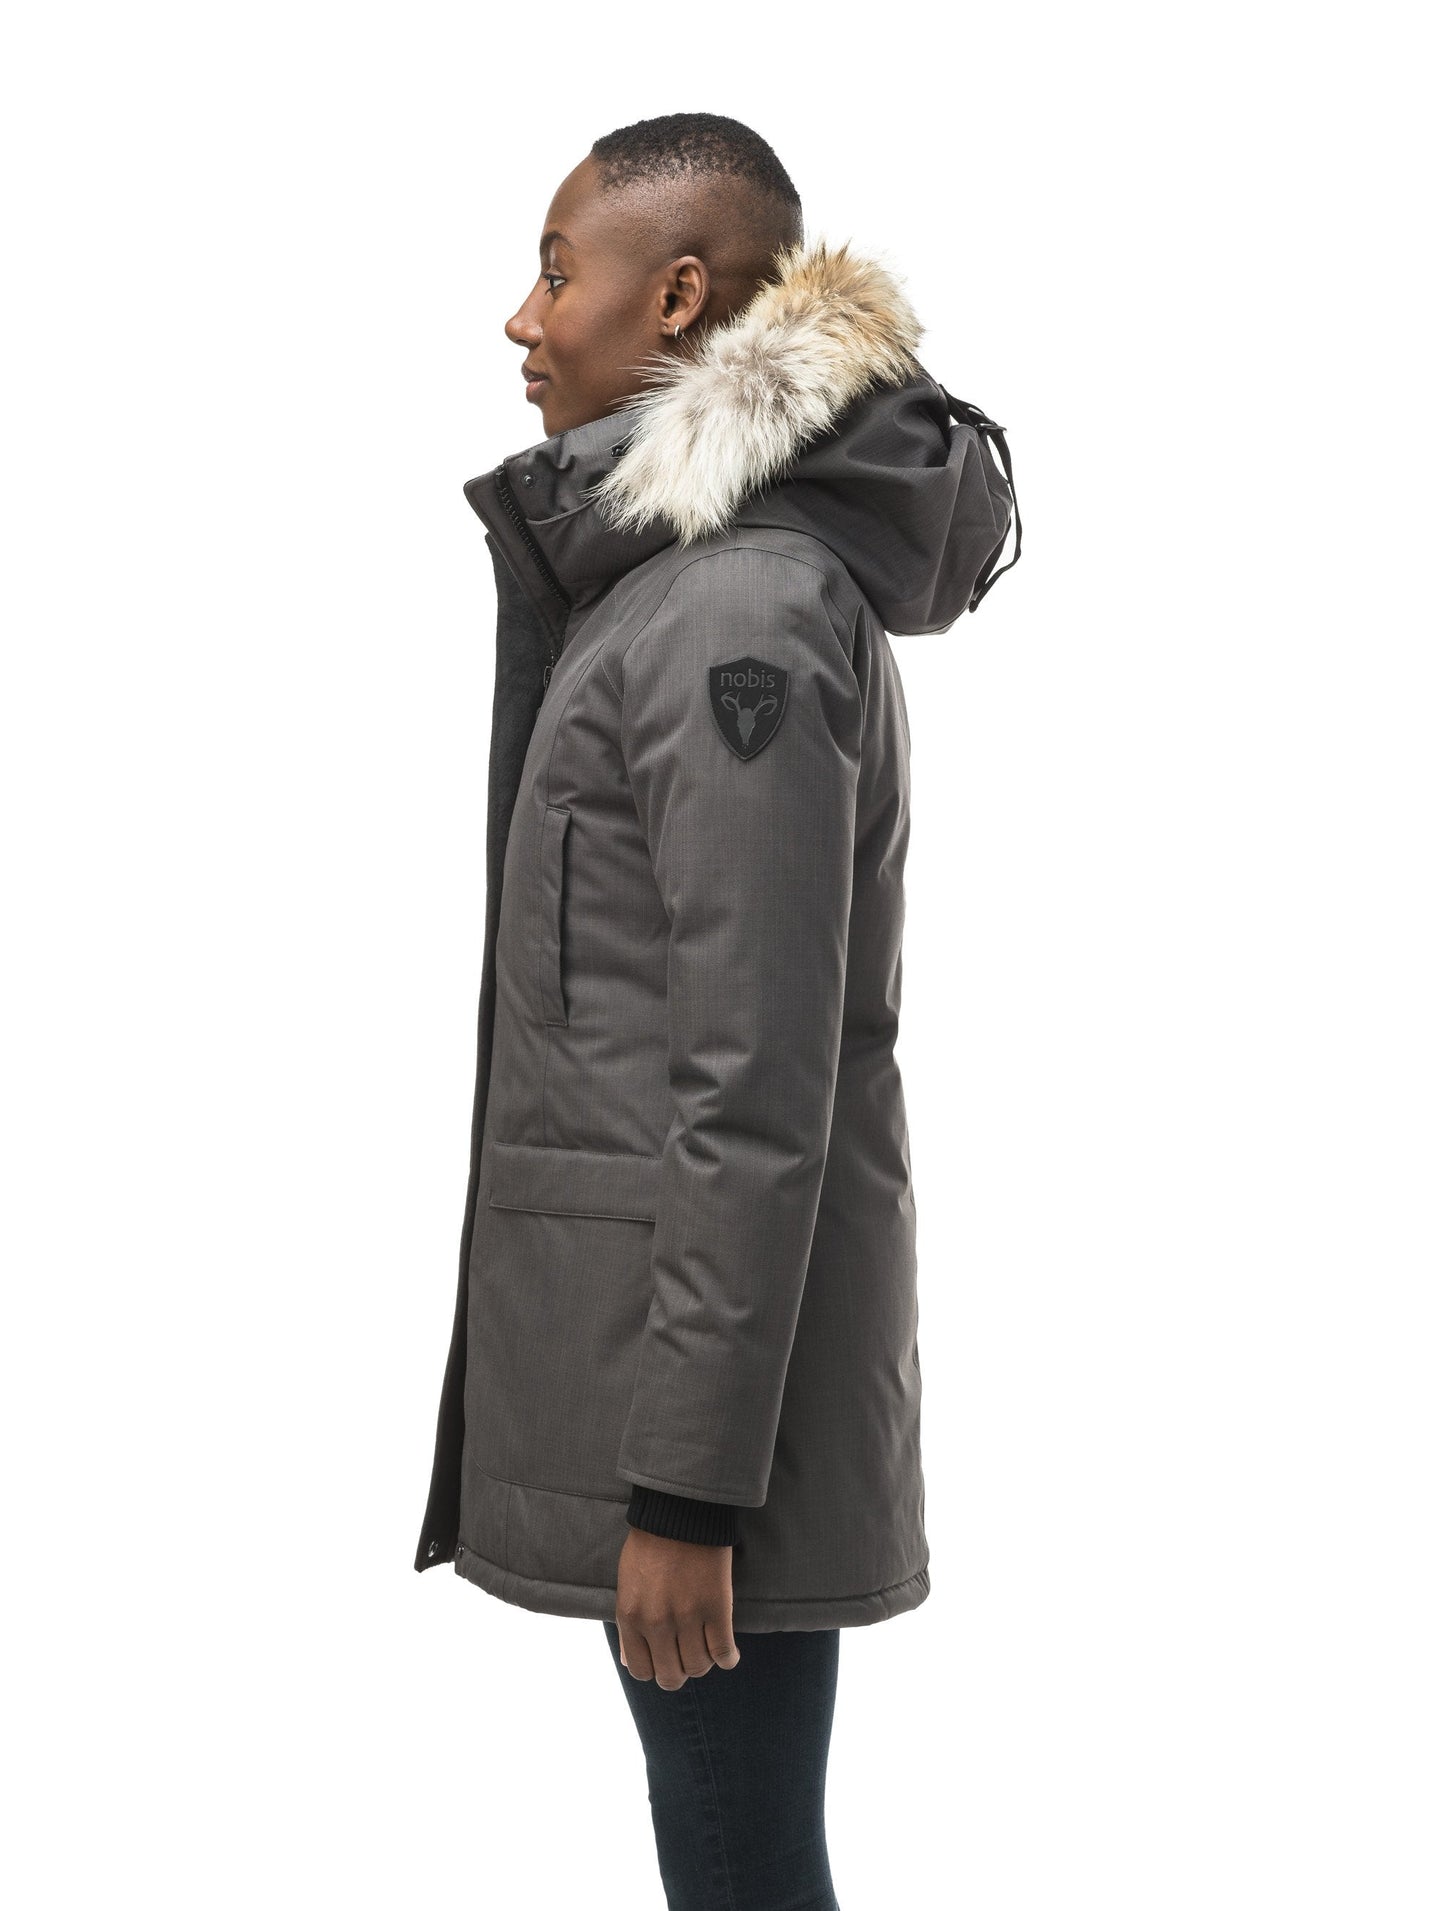 Women's down filled parka that sits just below the hip with a clean look and two hip patch pockets in CH Steel Grey